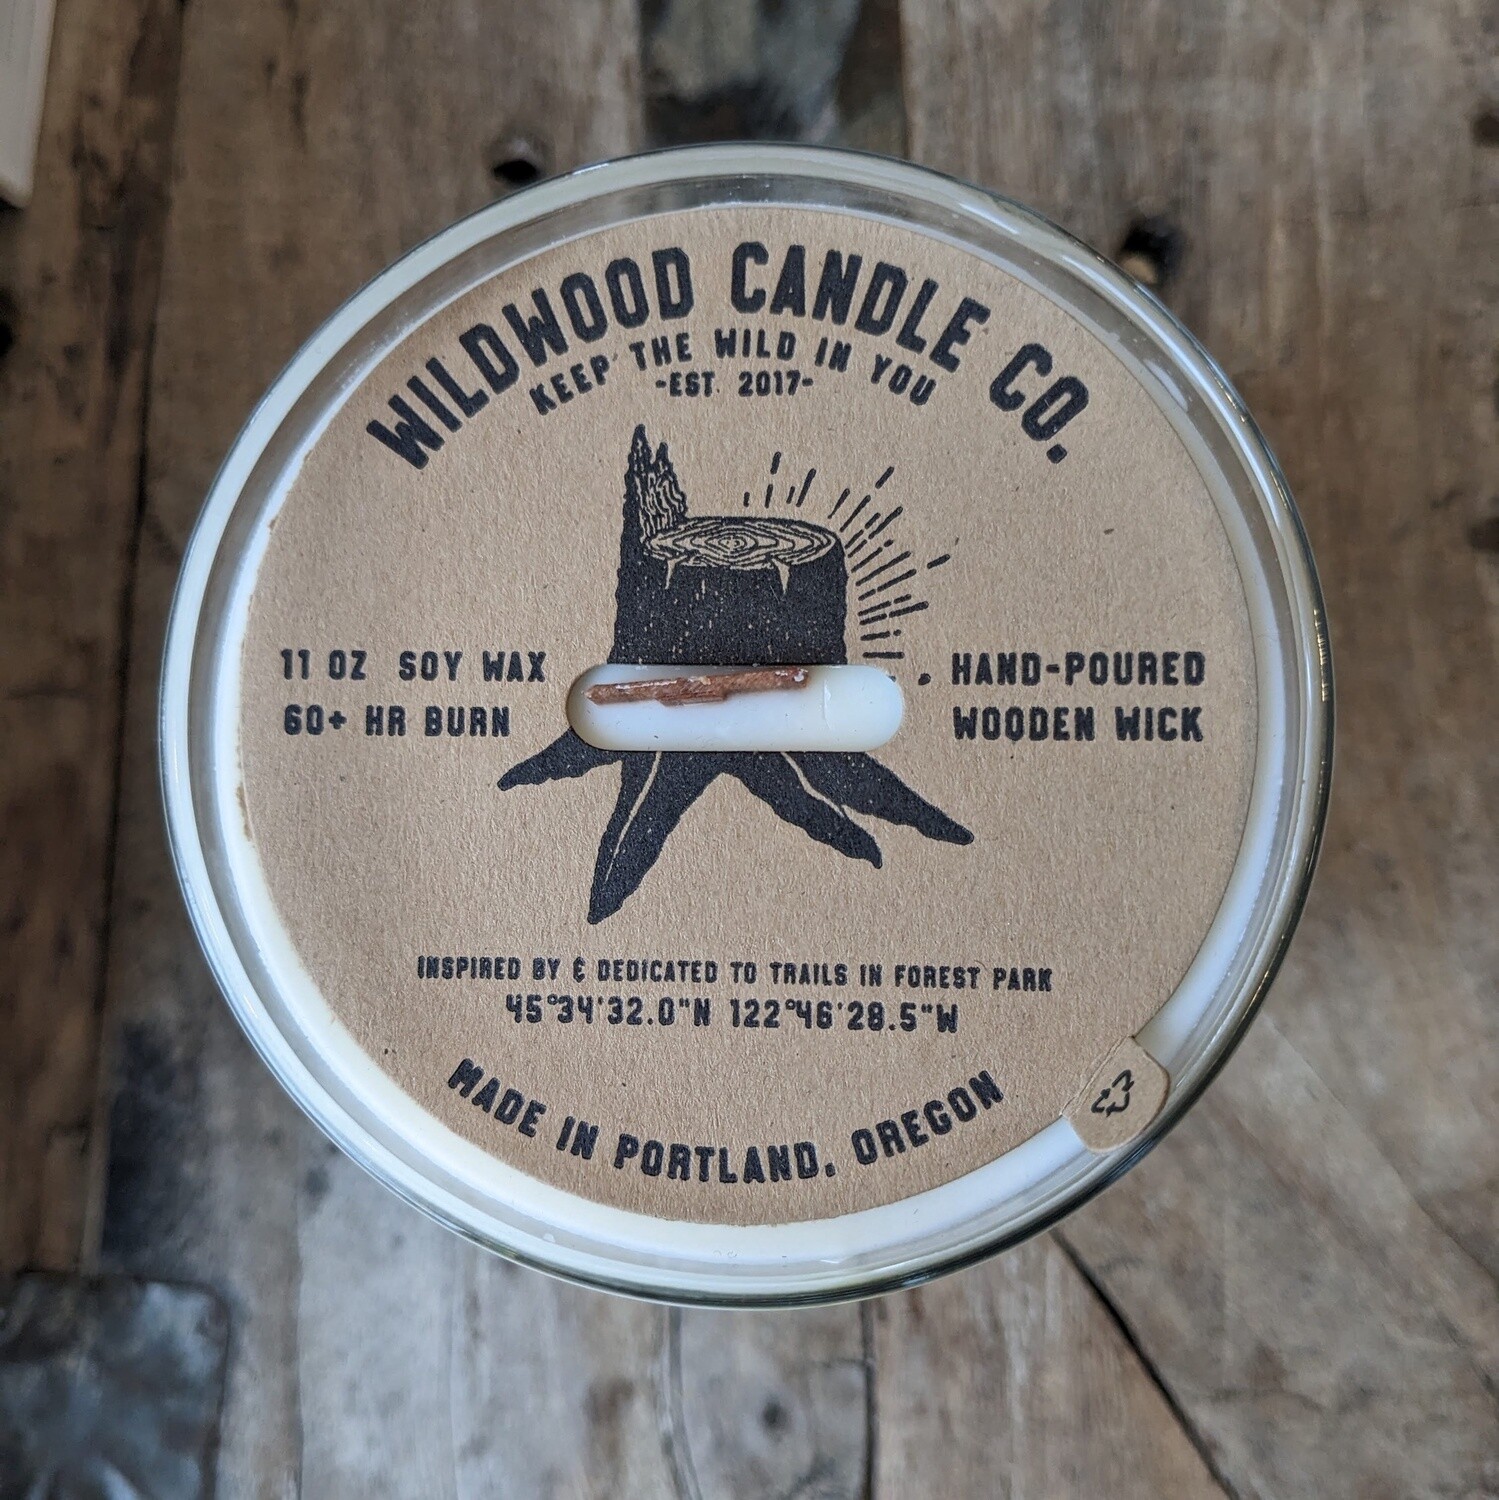 Wildwood Candle Co. Dogwood Scent